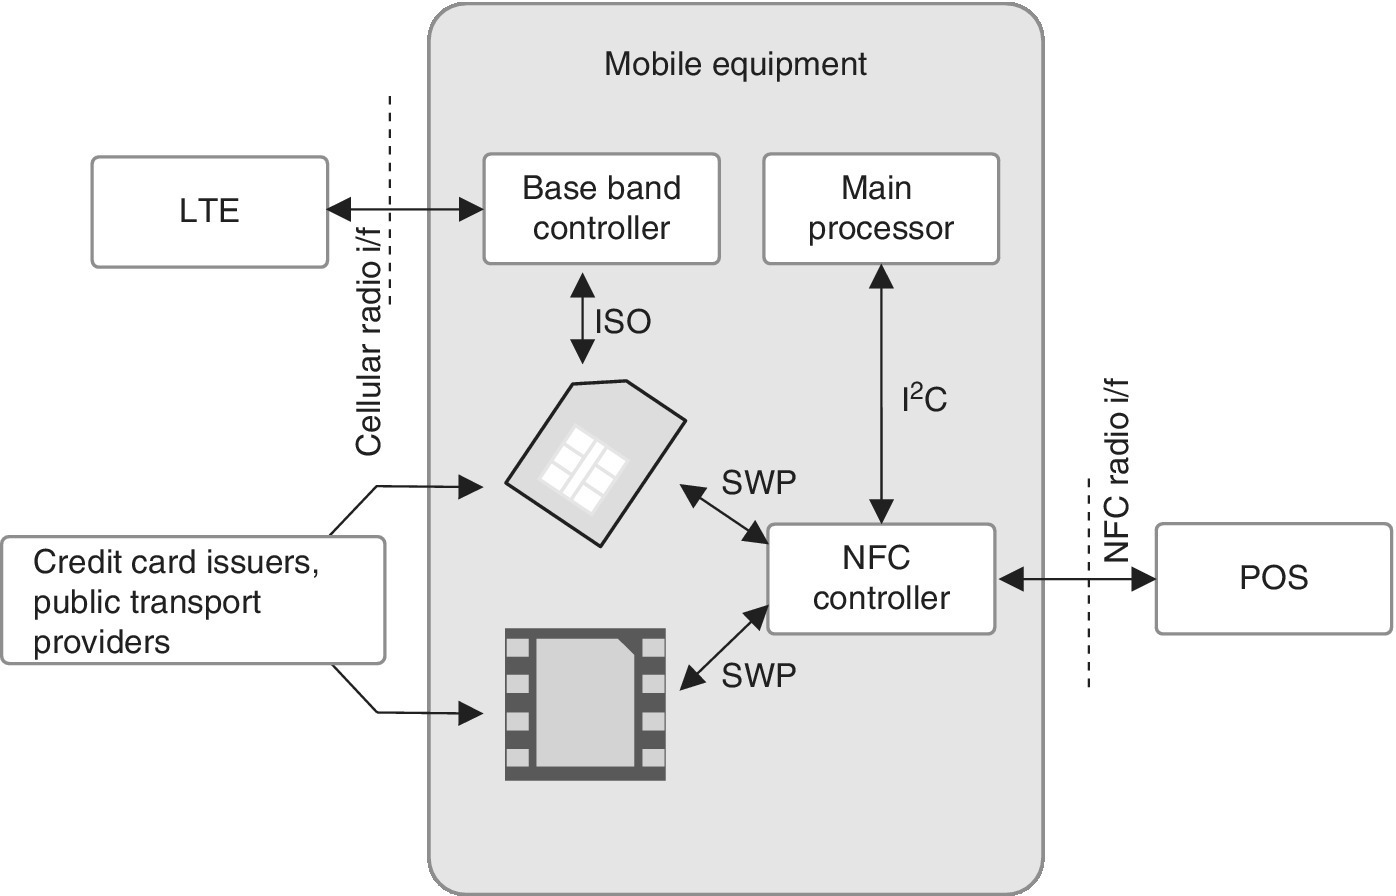 Schematic diagram depicting the development of the mobile payment area based on NFC functionality.